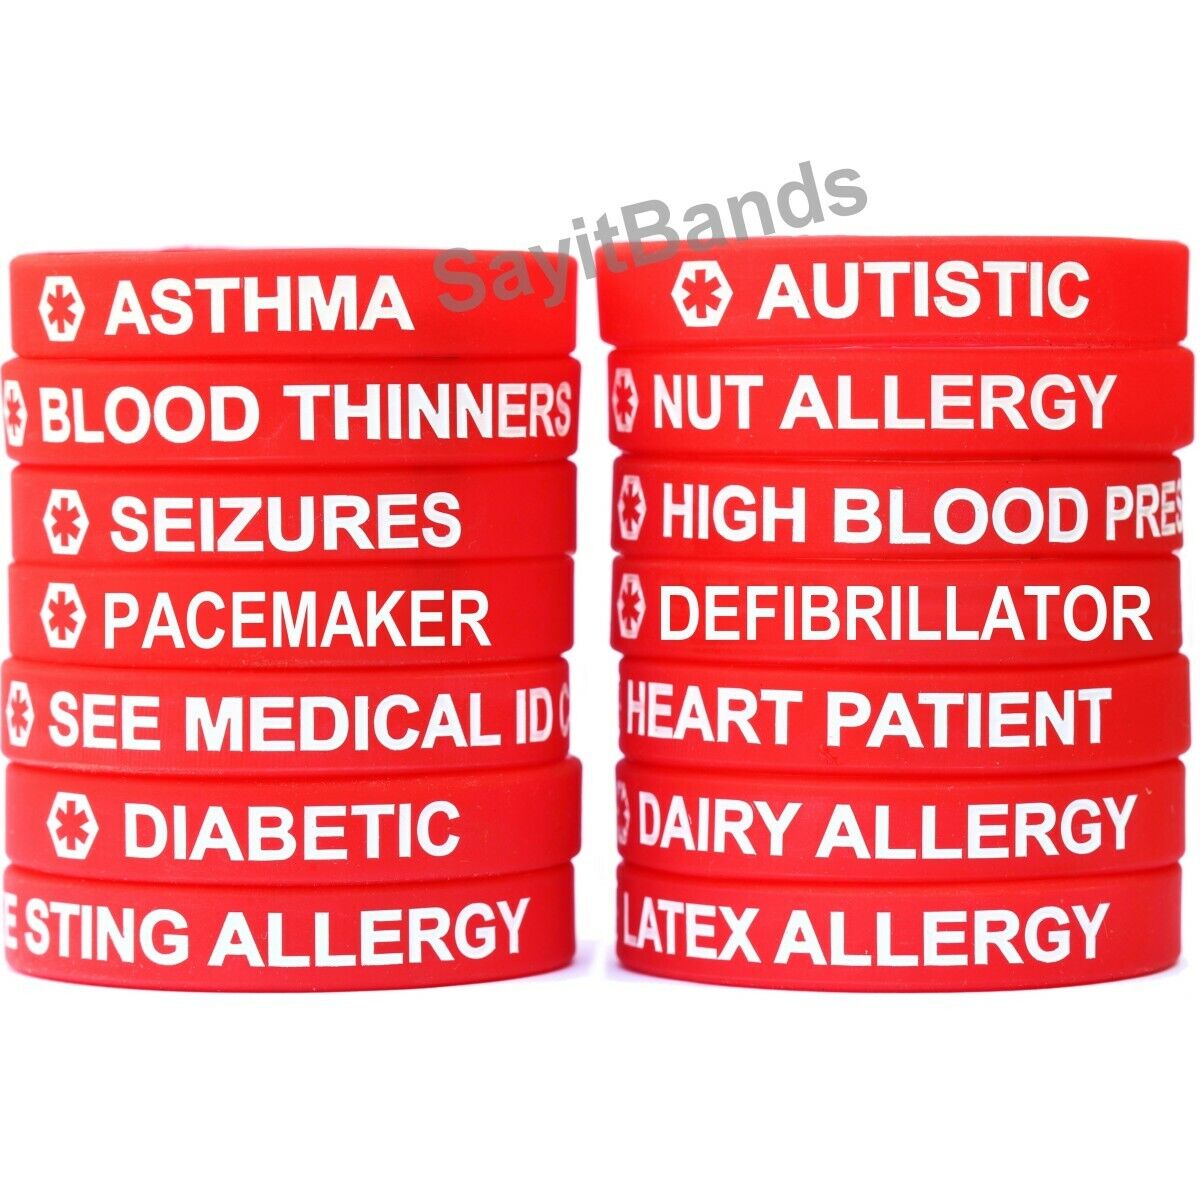 2 Red Medical Alert Wristband Bracelets - Two Med Condition Silicone Alert Bands SayitBands Does Not Apply